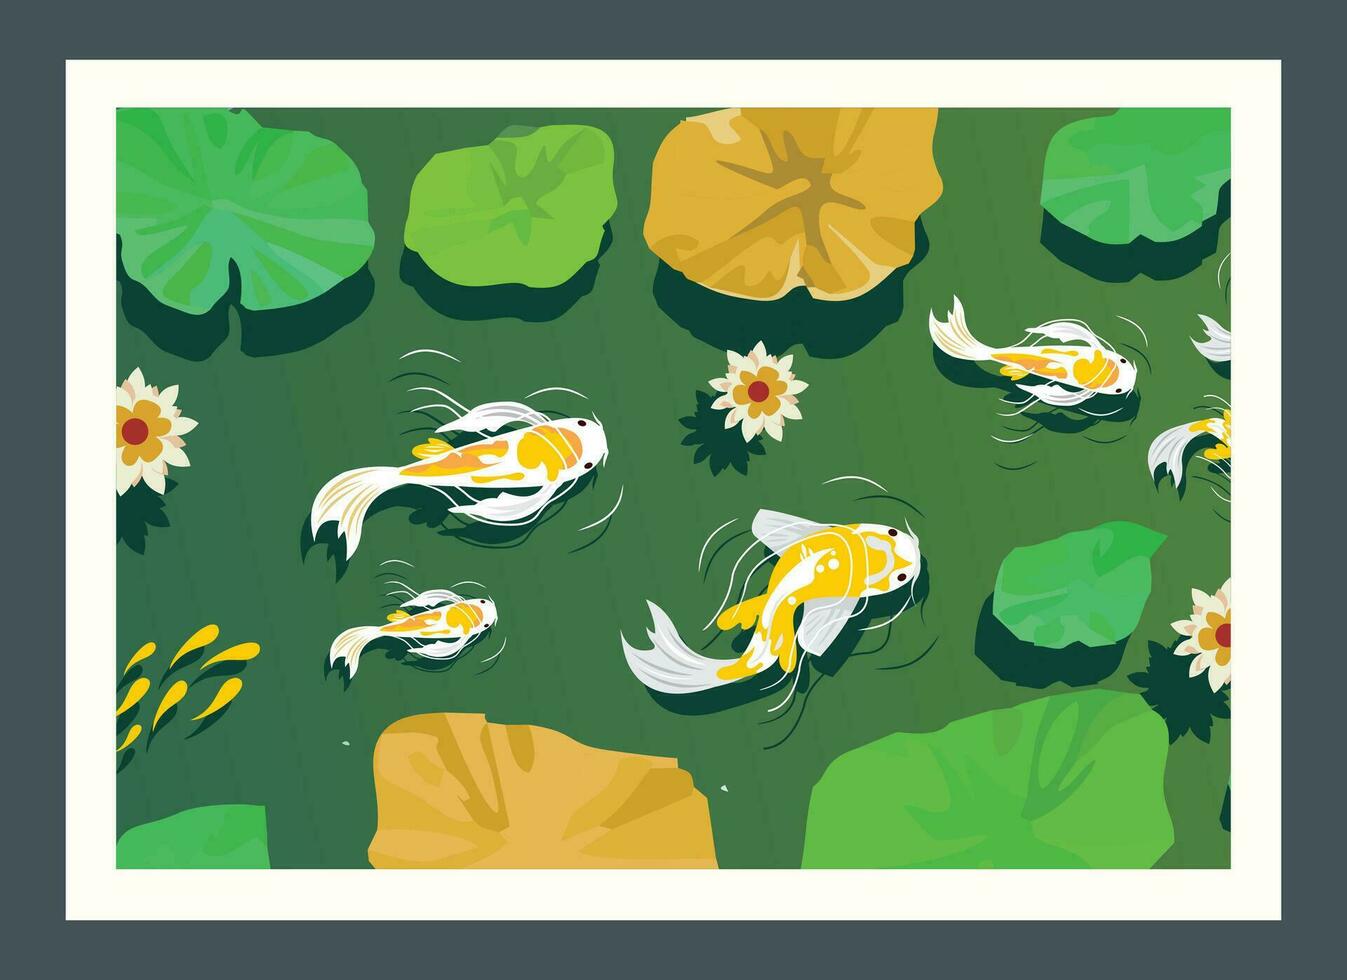 Koi Fish painting design, illustration of koi fish in a pond, wall decoration. home decoration painting. vector